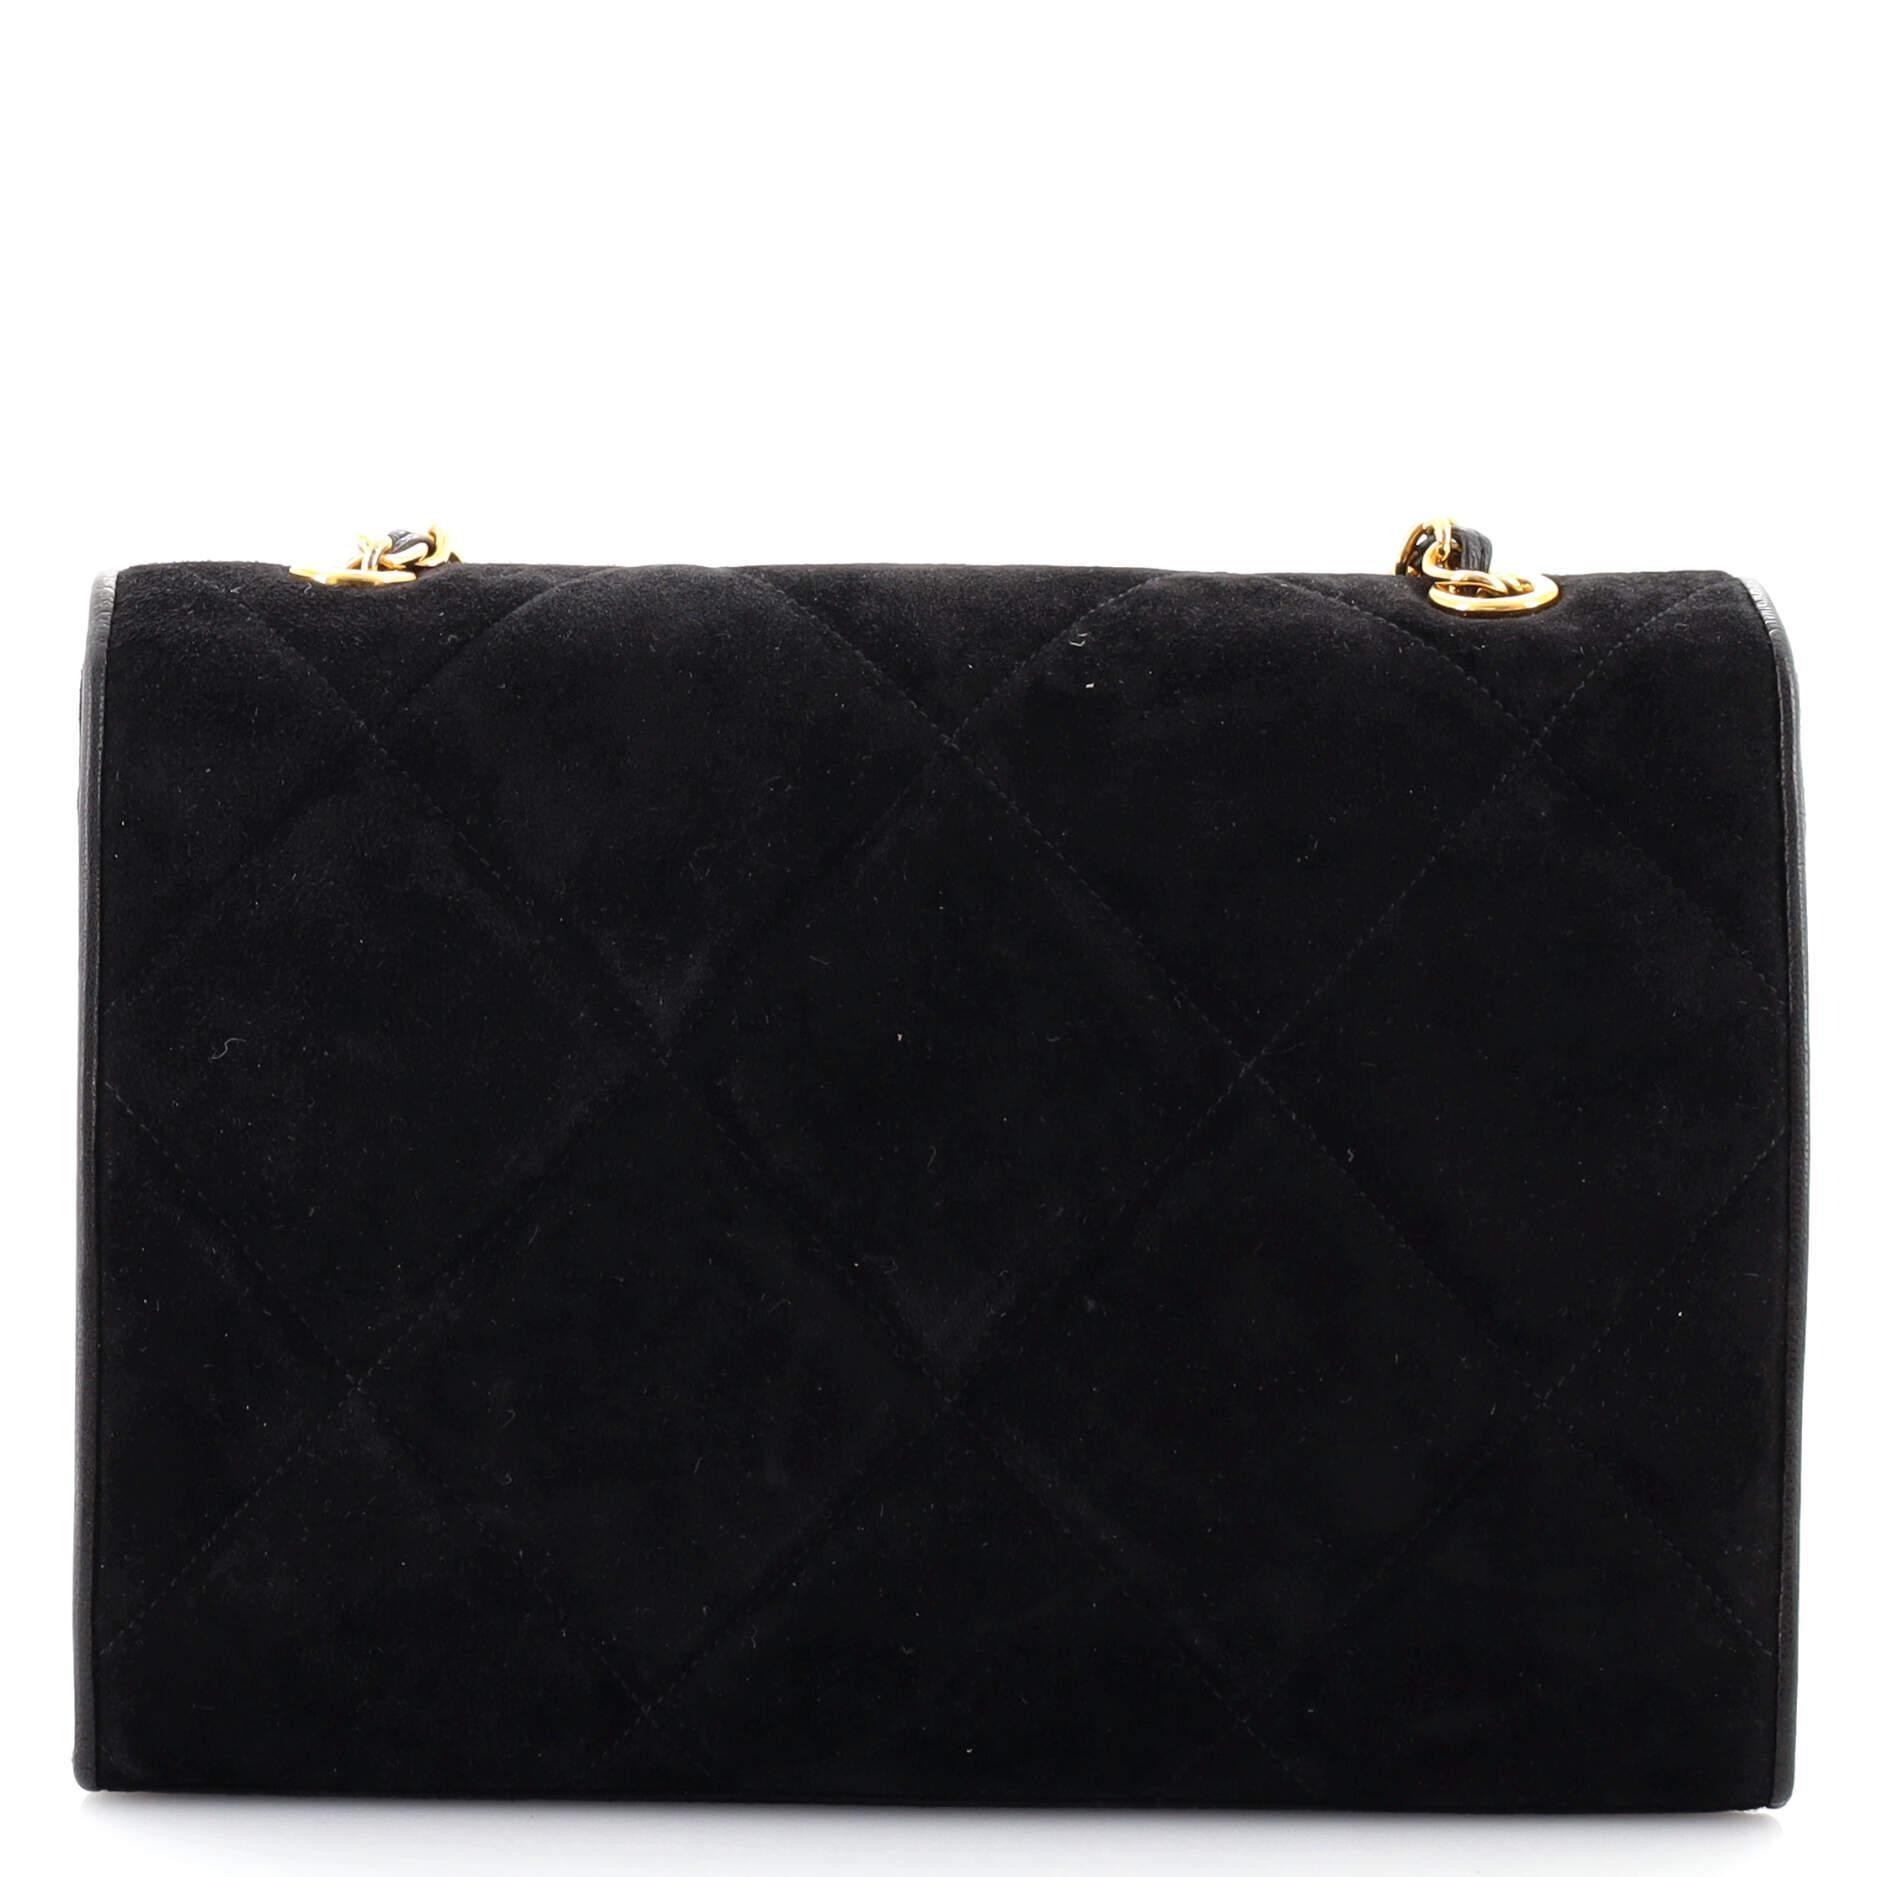 Black Chanel Vintage Diamond CC Flap Bag Quilted Suede Small